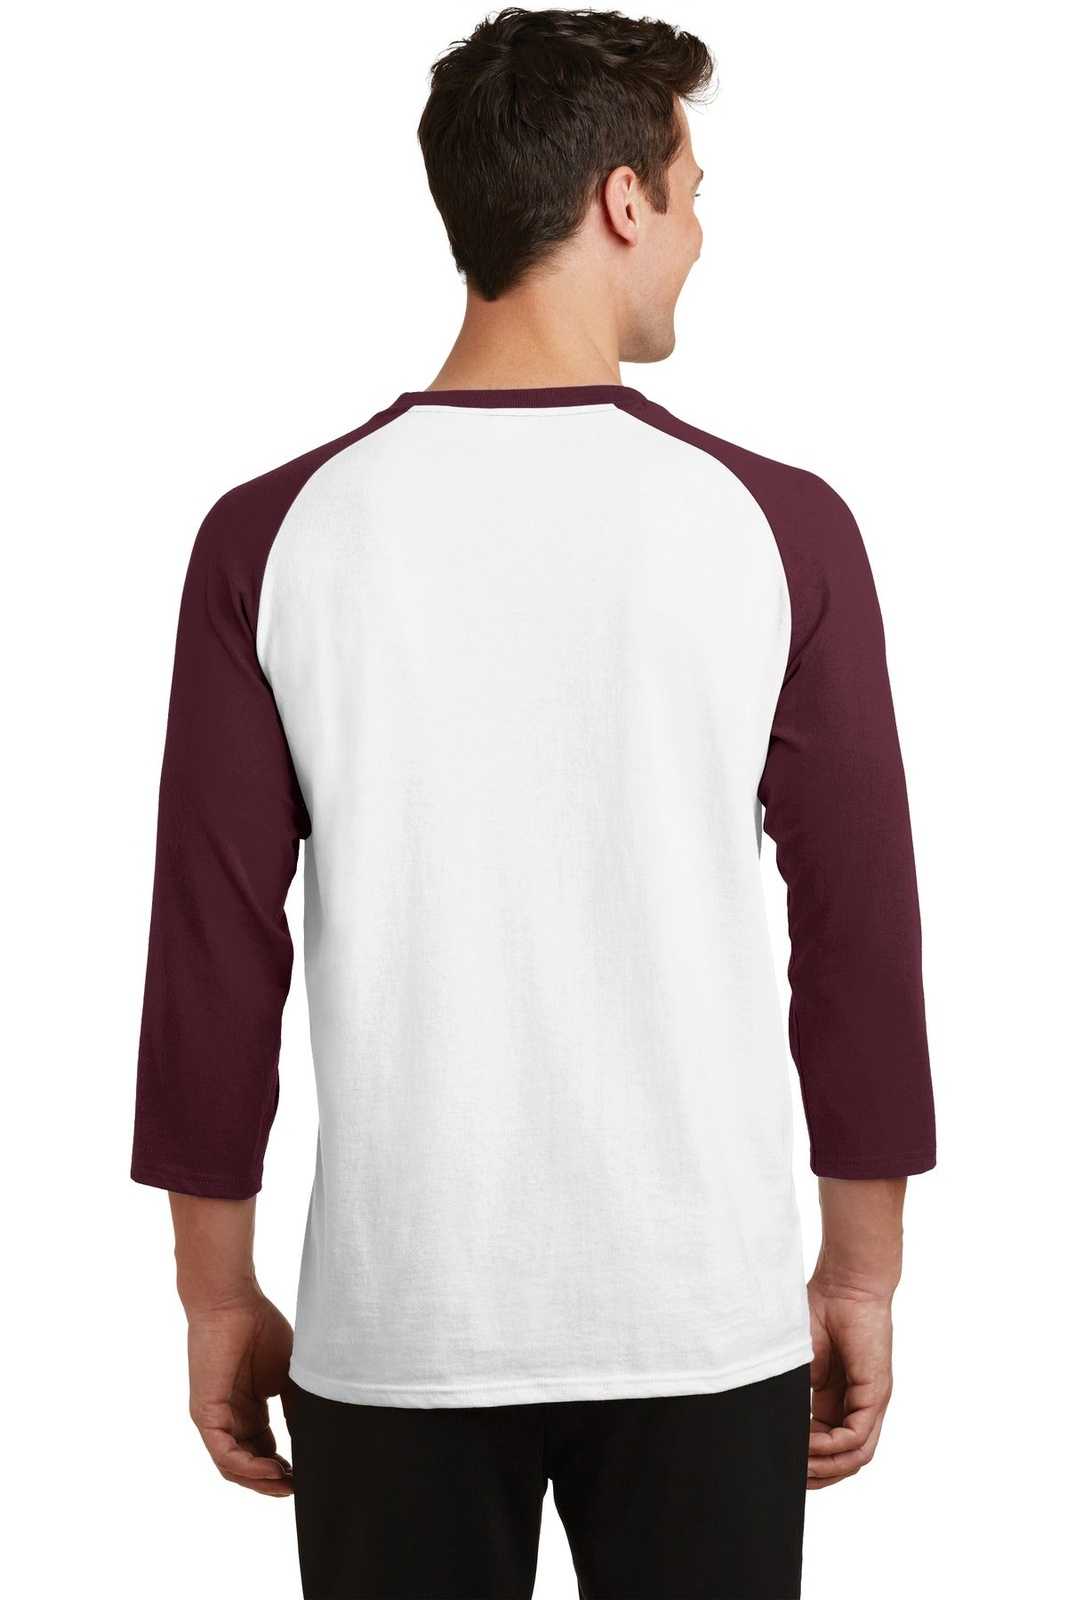 Port & Company PC55RS Core Blend 3/4-Sleeve Raglan Tee - White Athletic Maroon - HIT a Double - 1